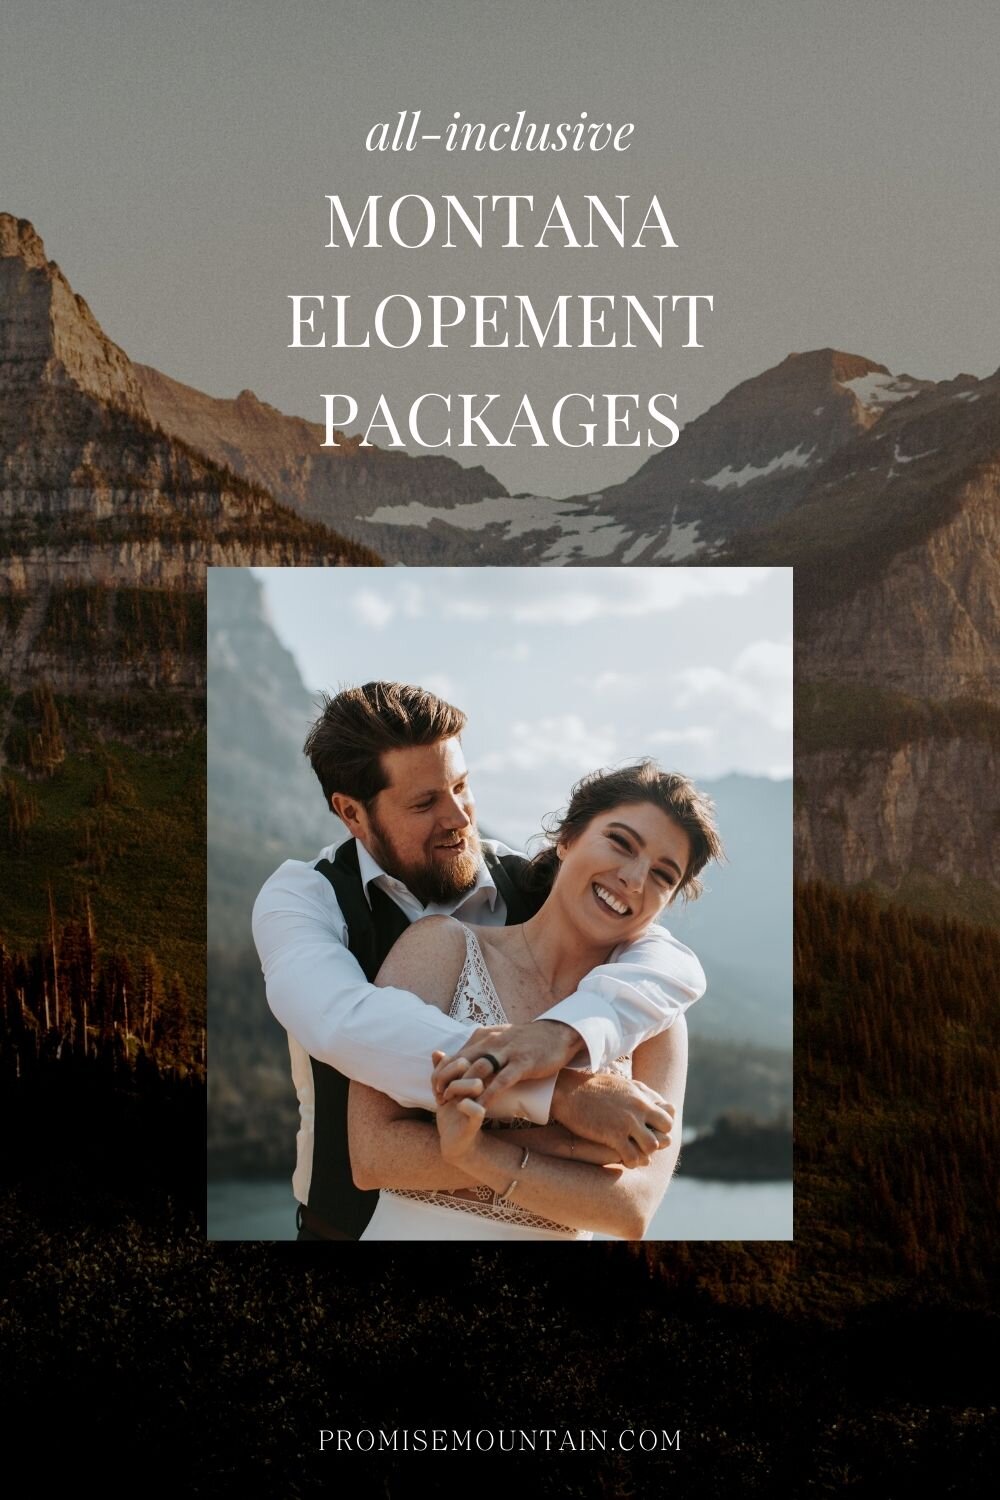 Groom wraps his arms around the bride as they smile during their elopement shoot; image overlaid with text that reads All-inclusive Montana Elopement Packages